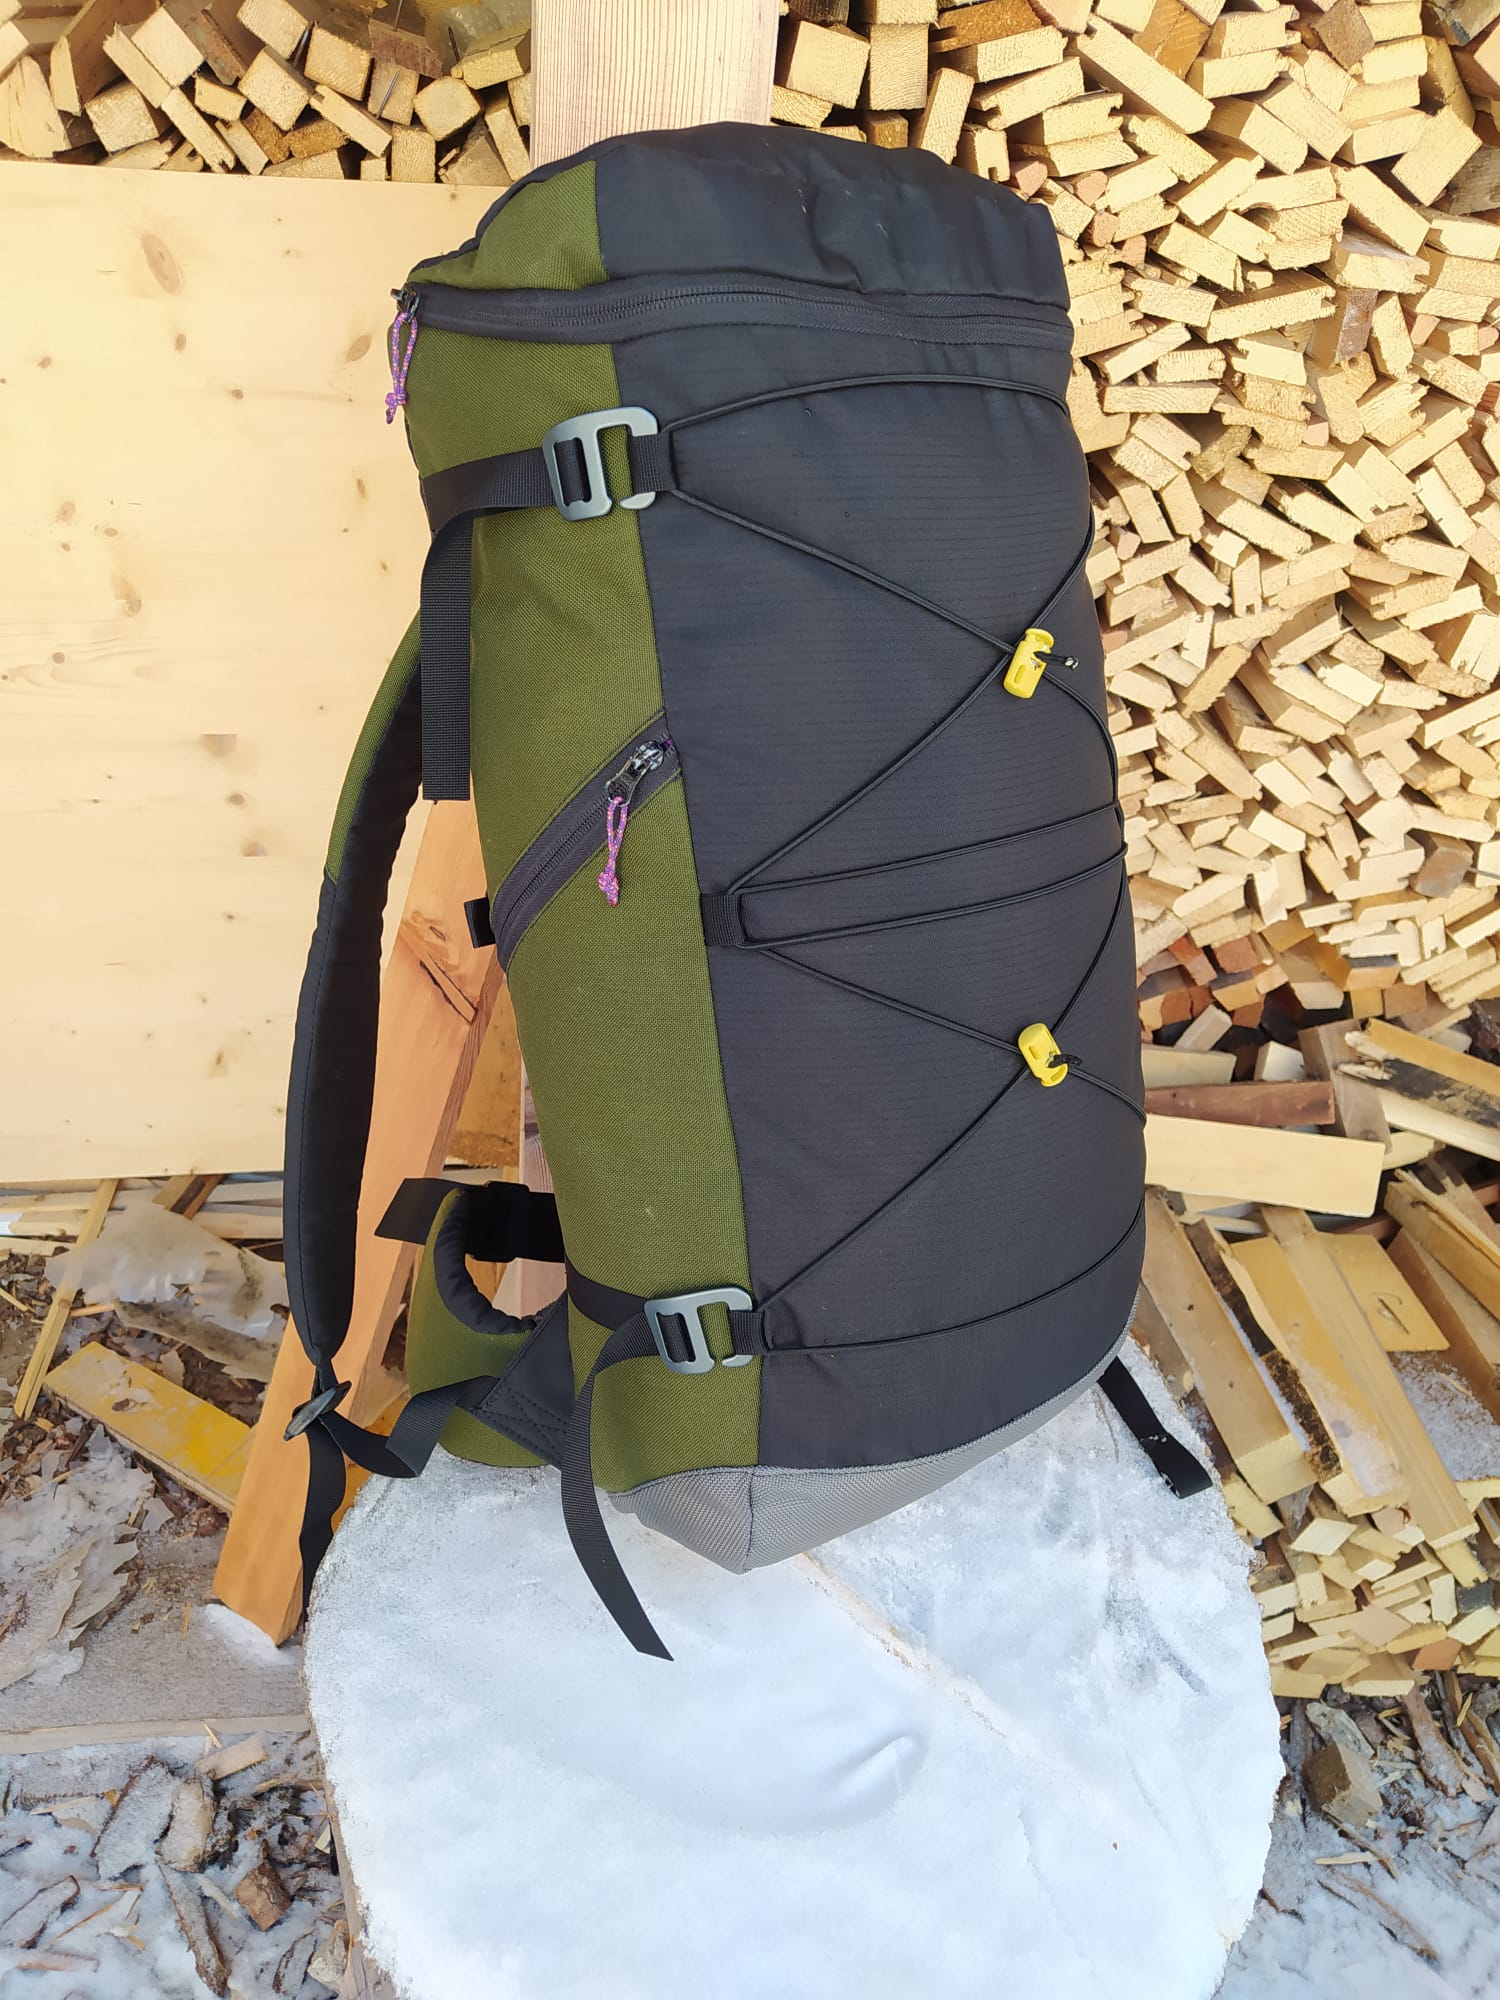 25L Backpack made of Cordura